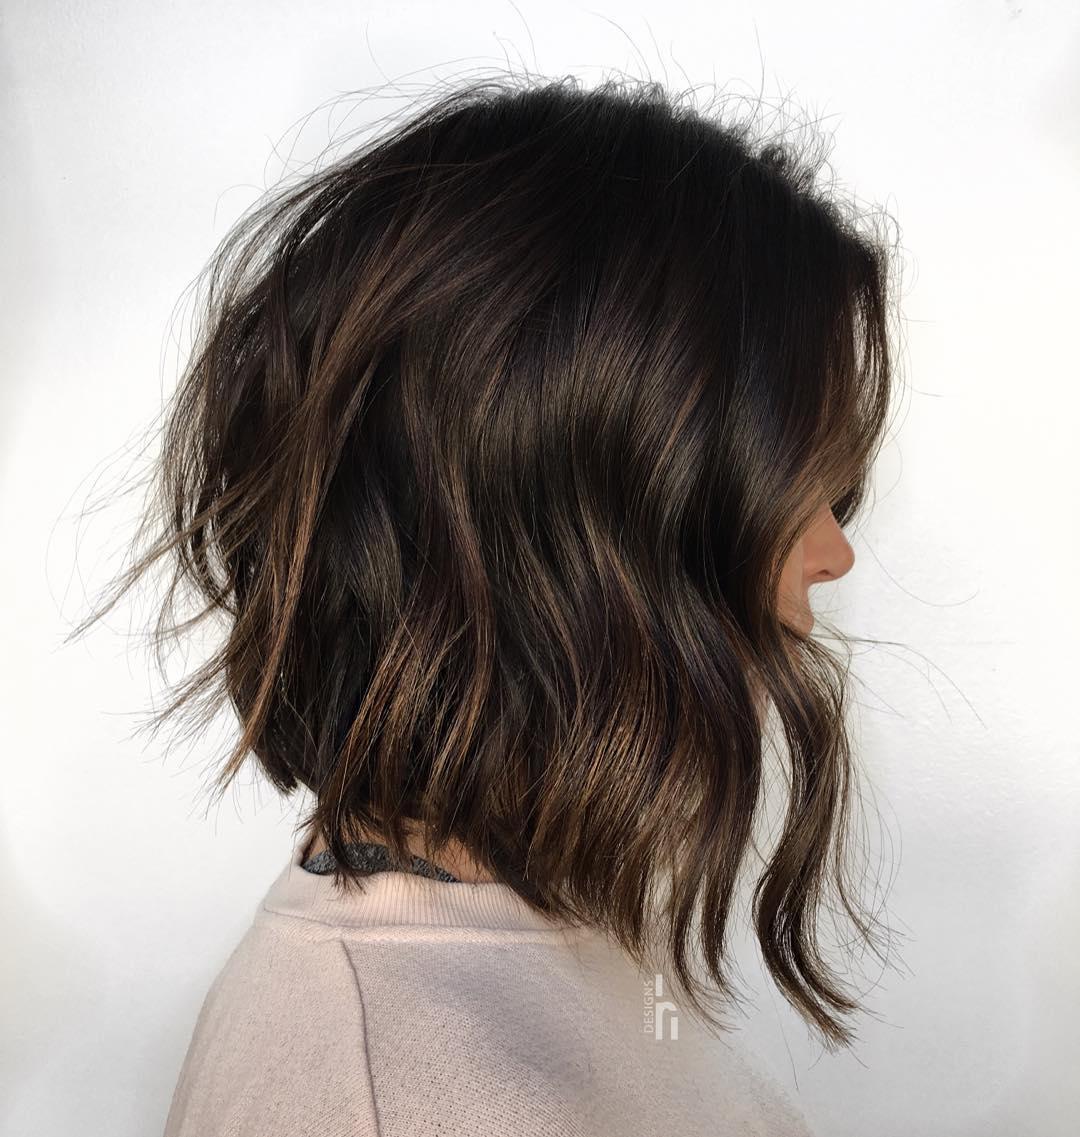 10 Insanely Cute Layered Bob Haircuts To Transform Your Looks